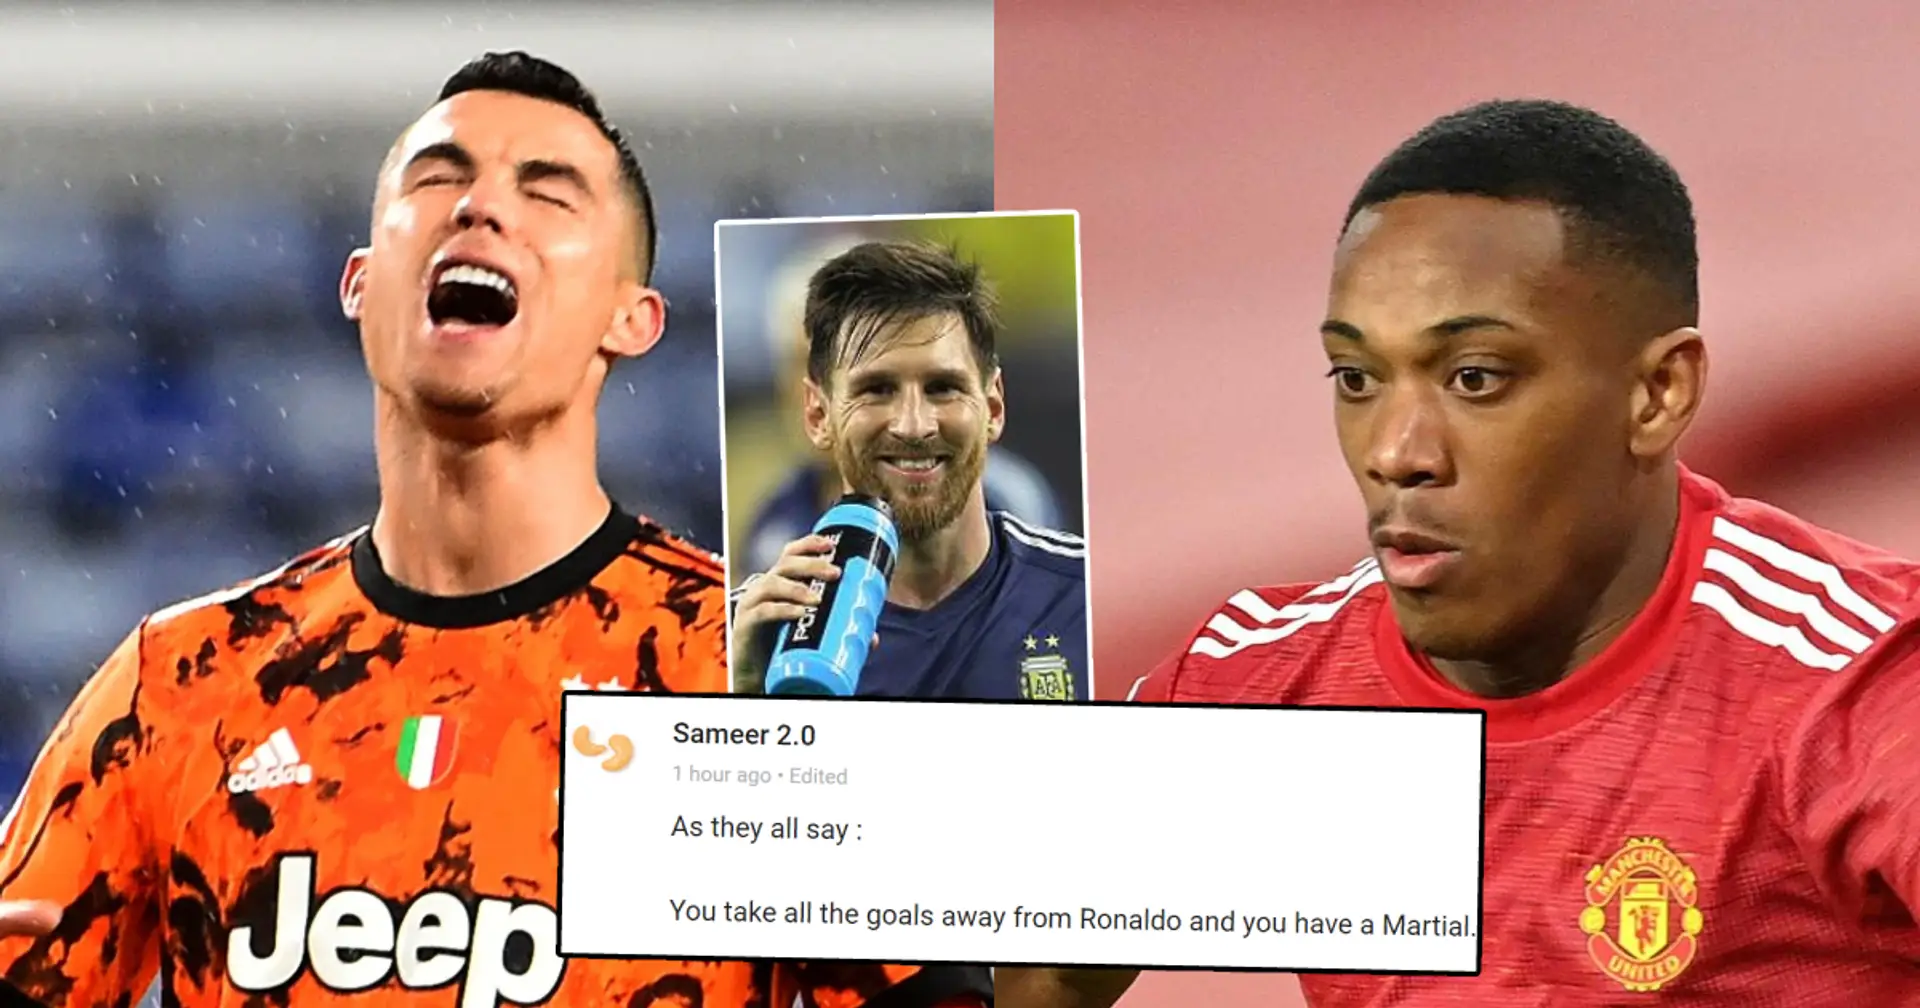 'That's why Leo was, is and always shall be the GOAT': Barca fan brilliantly sums up state of Ronaldo-Messi debate